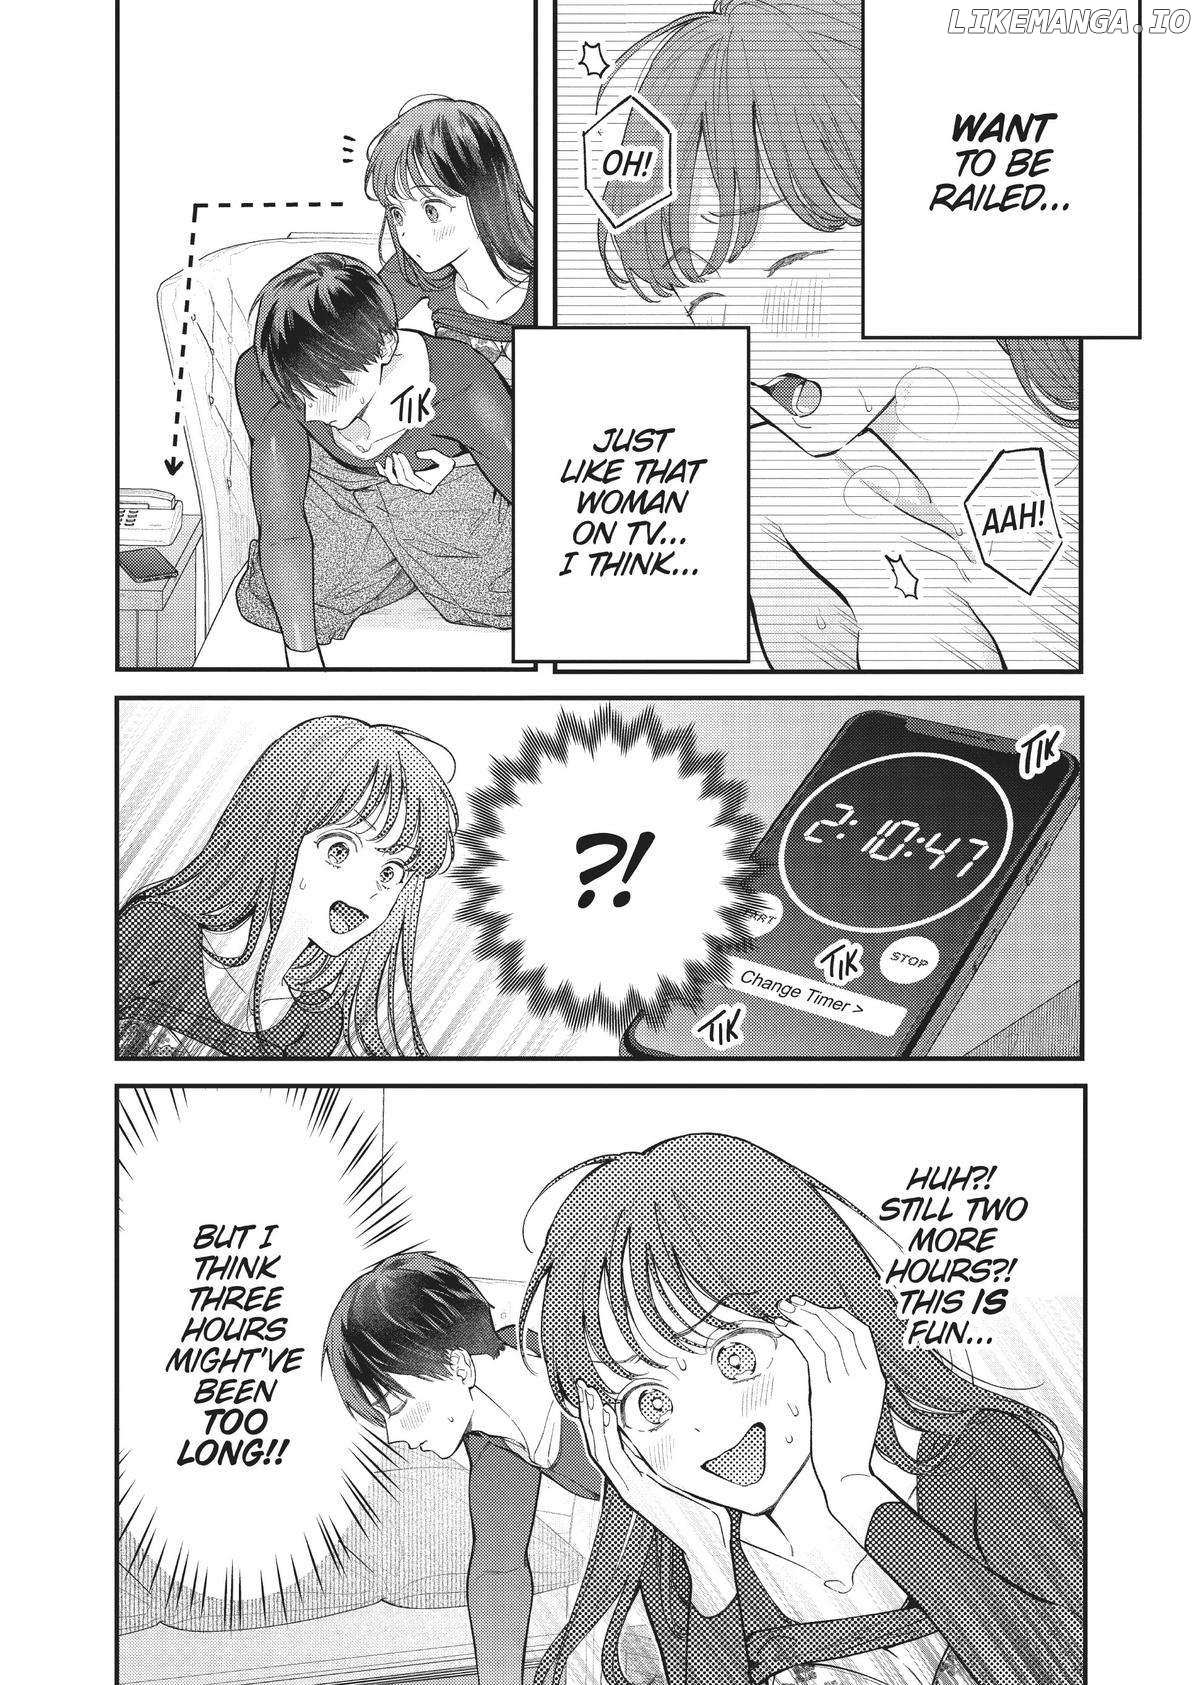 Is It Wrong To Get Done By A Girl? - Page 2